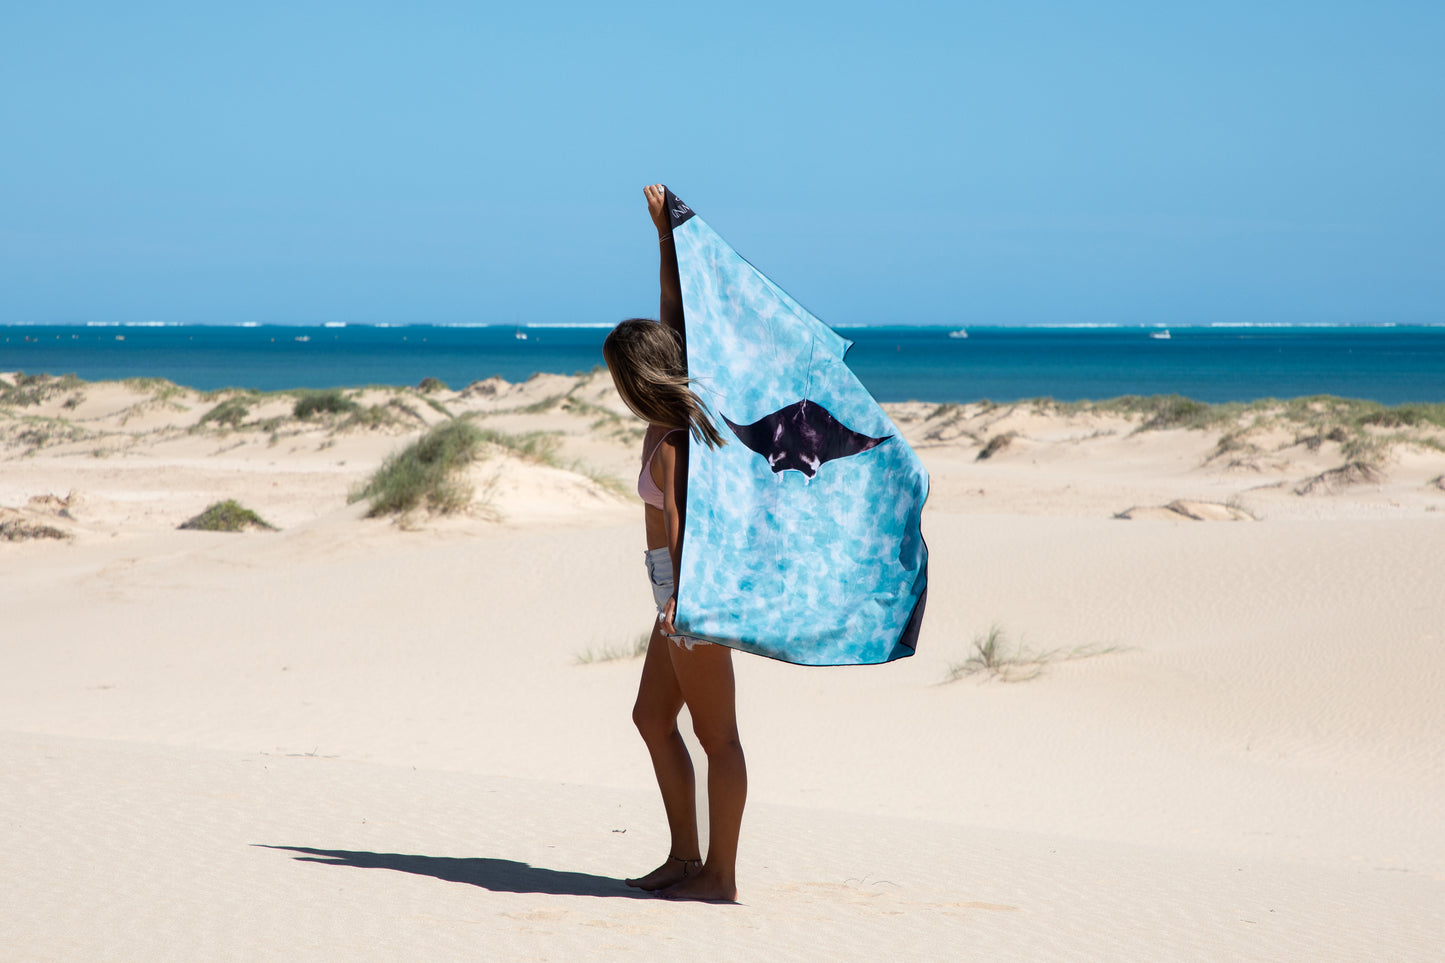 Manta Ray Travel TowelInspired by the crystal clear blue water on the Ningaloo Reef.We often pop our sunglasses down just to check it's not a filter, only to confirm it is in fact PARADISE. Watch as the Manta Rays gracefully glide through what can only be described as 'glassy seas'Sand Free, Quick Dry Travel Towel For the beach, travelling, camping, exercising and more! Sustainably made using post-consumer plastic in the form of recycled Polyester (rPET)in our signature buttery soft Microfiber Suede$64.99Wi